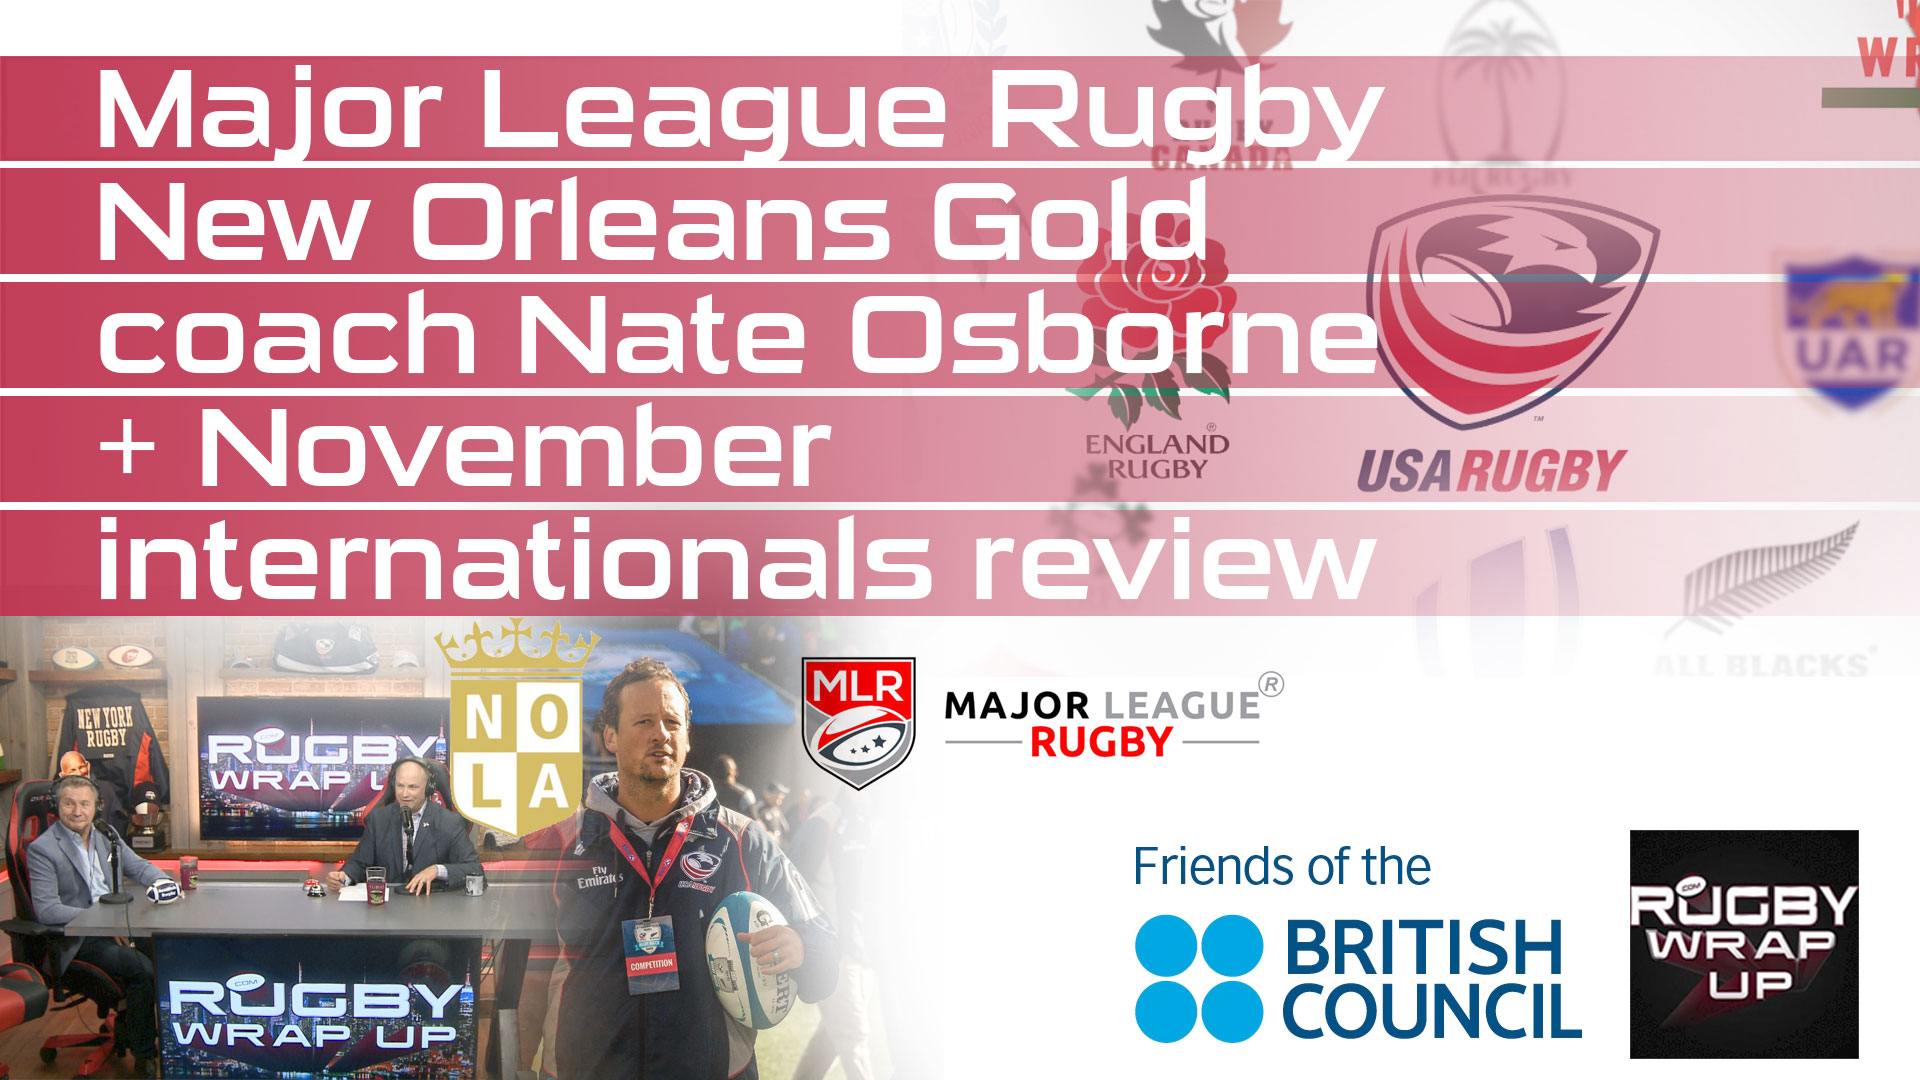 Major-League-Rugby-New-Orleans-Gold-coach-Nate-Osborne--November-internationals-review